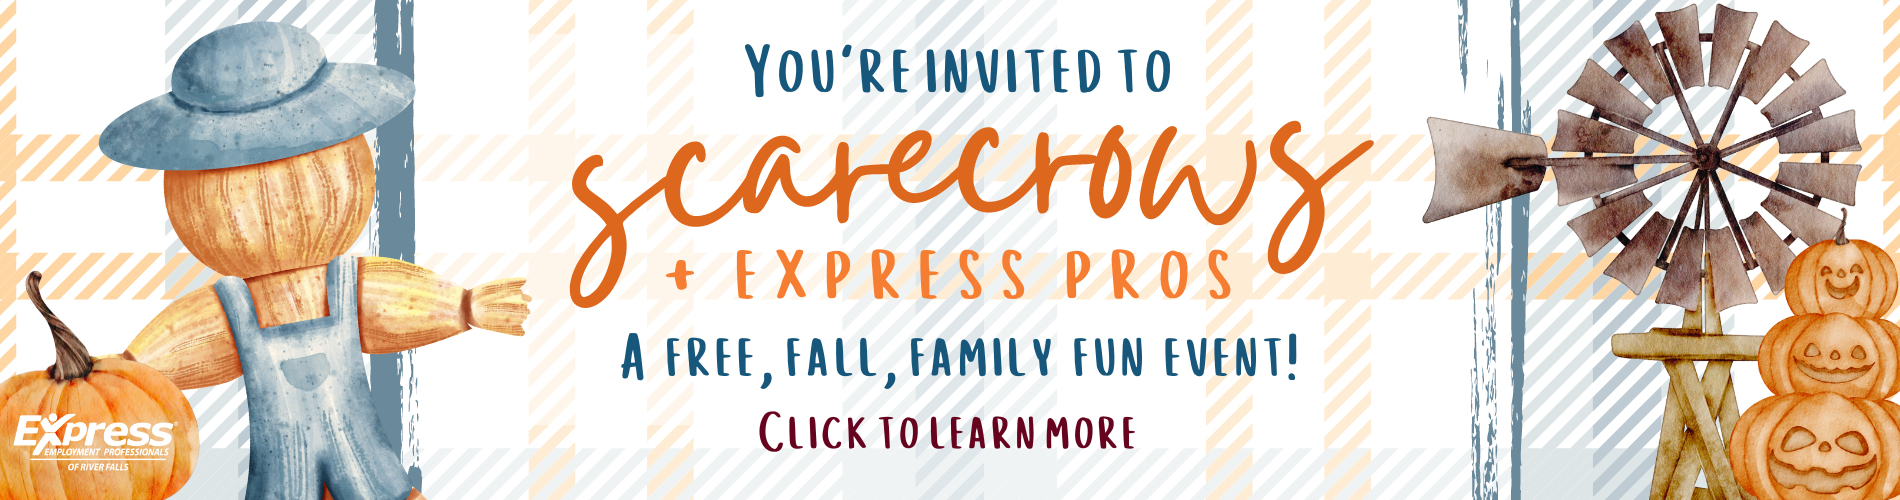 Scarecrows and Express Pros Website Banner